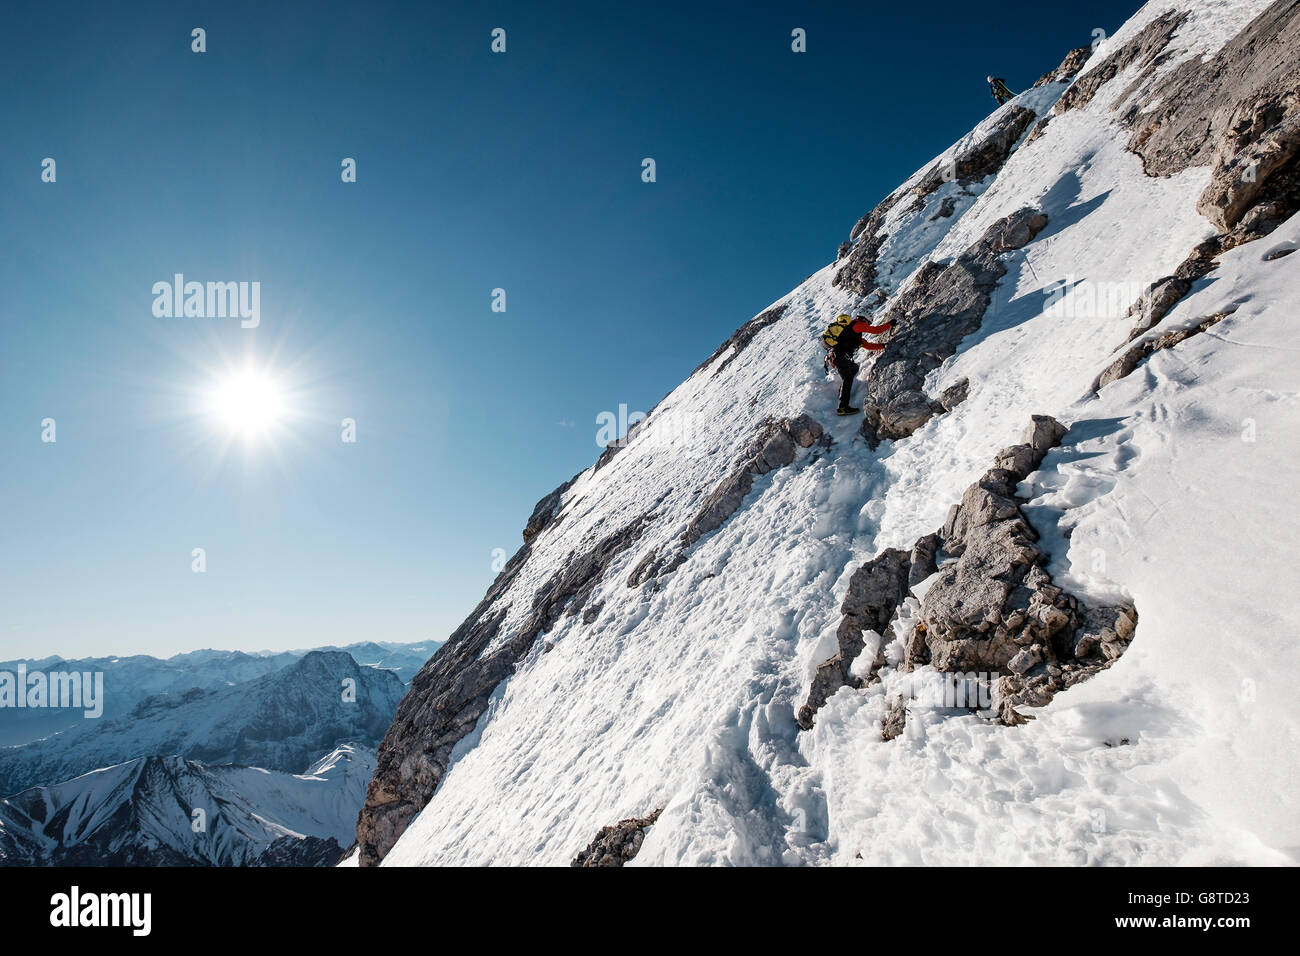 Two mountaineers climbing a snowcapped wall in European Alps Stock Photo